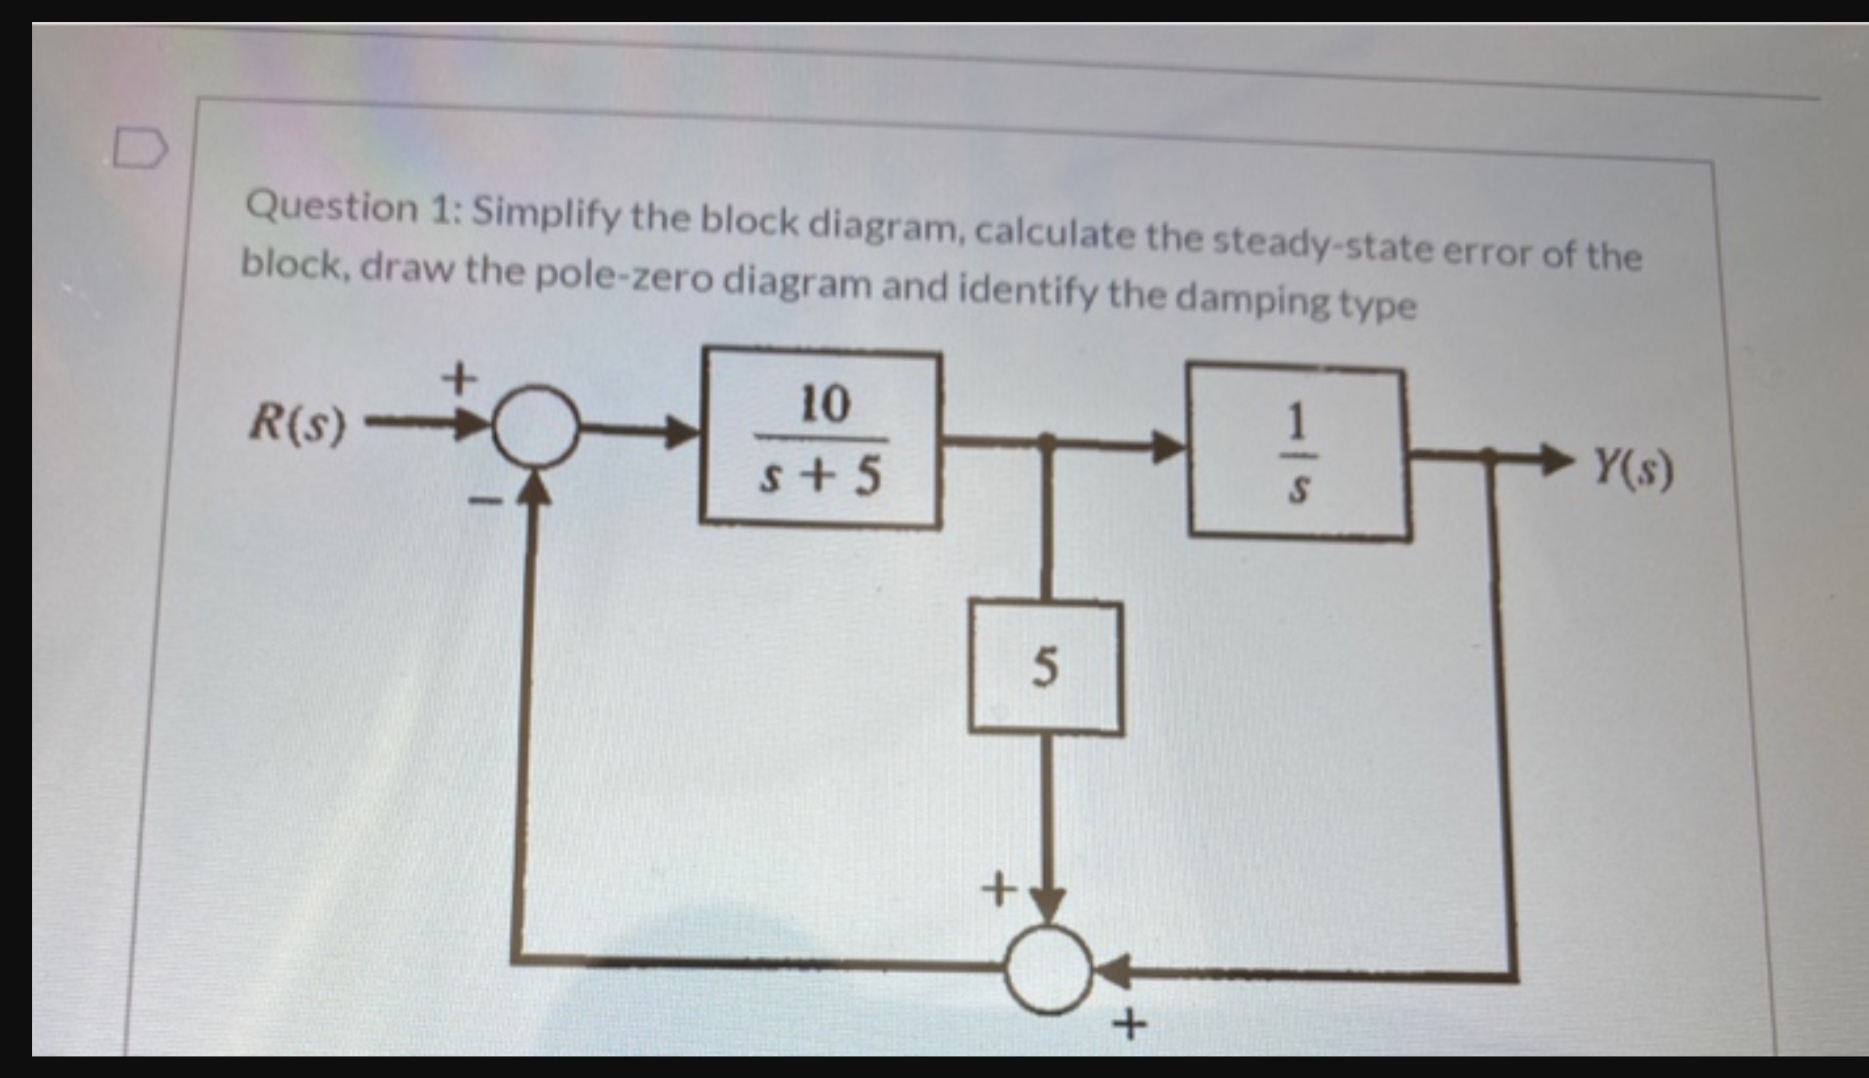 Question 1: Simplify the block diagram, calculate the steady-state error of the
block, draw the pole-zero diagram and identify the damping type
10
R(s)
Y(s)
s+ 5
